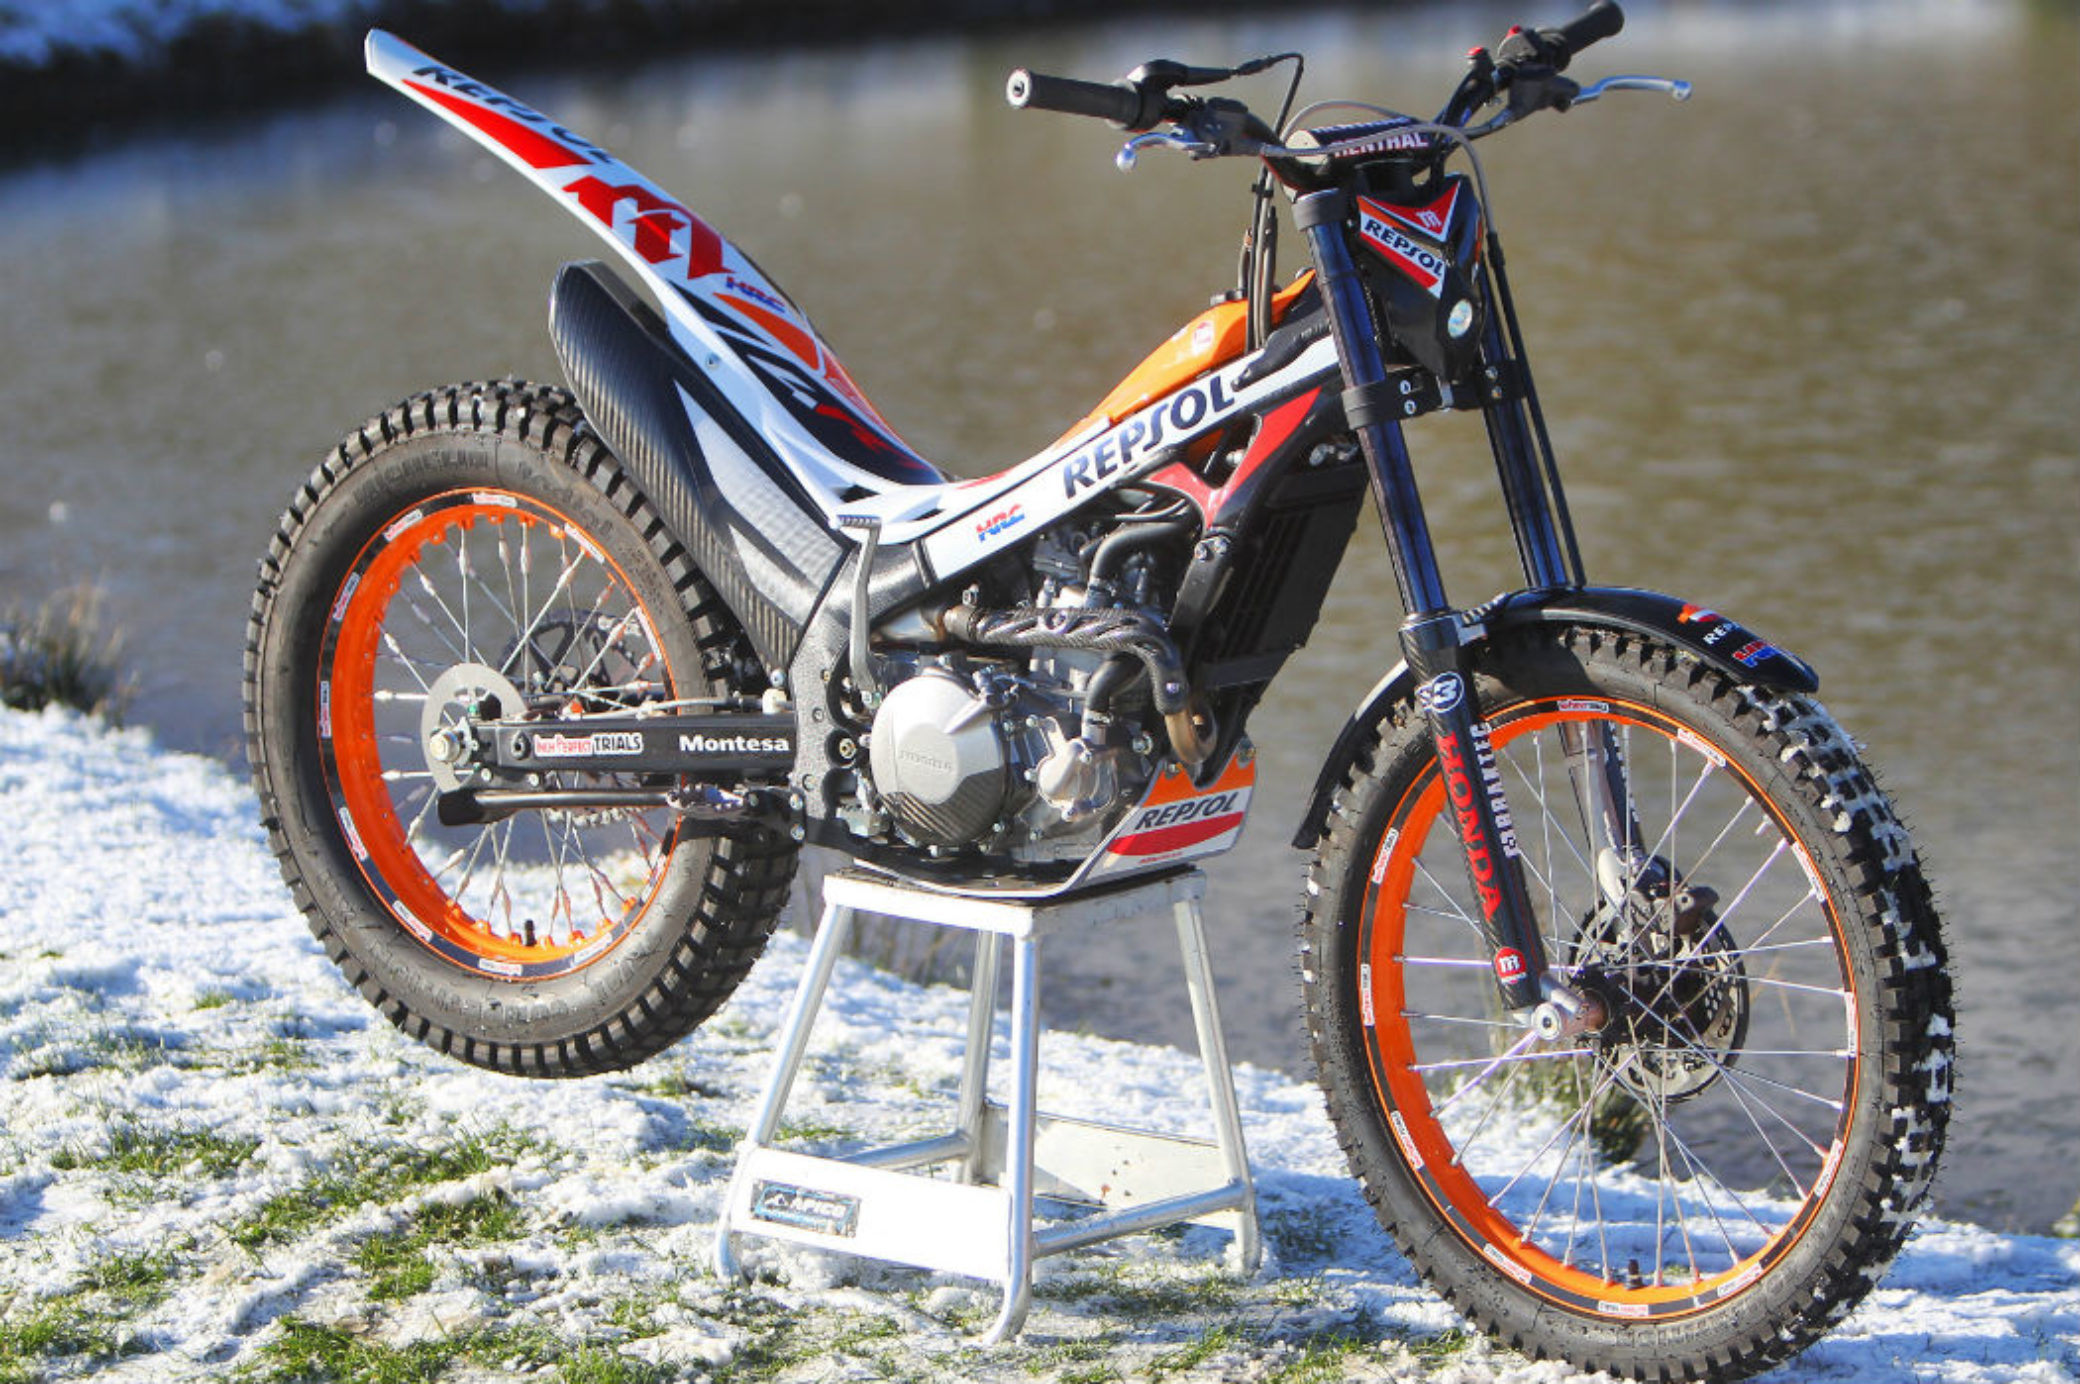 used trs trials bike for sale